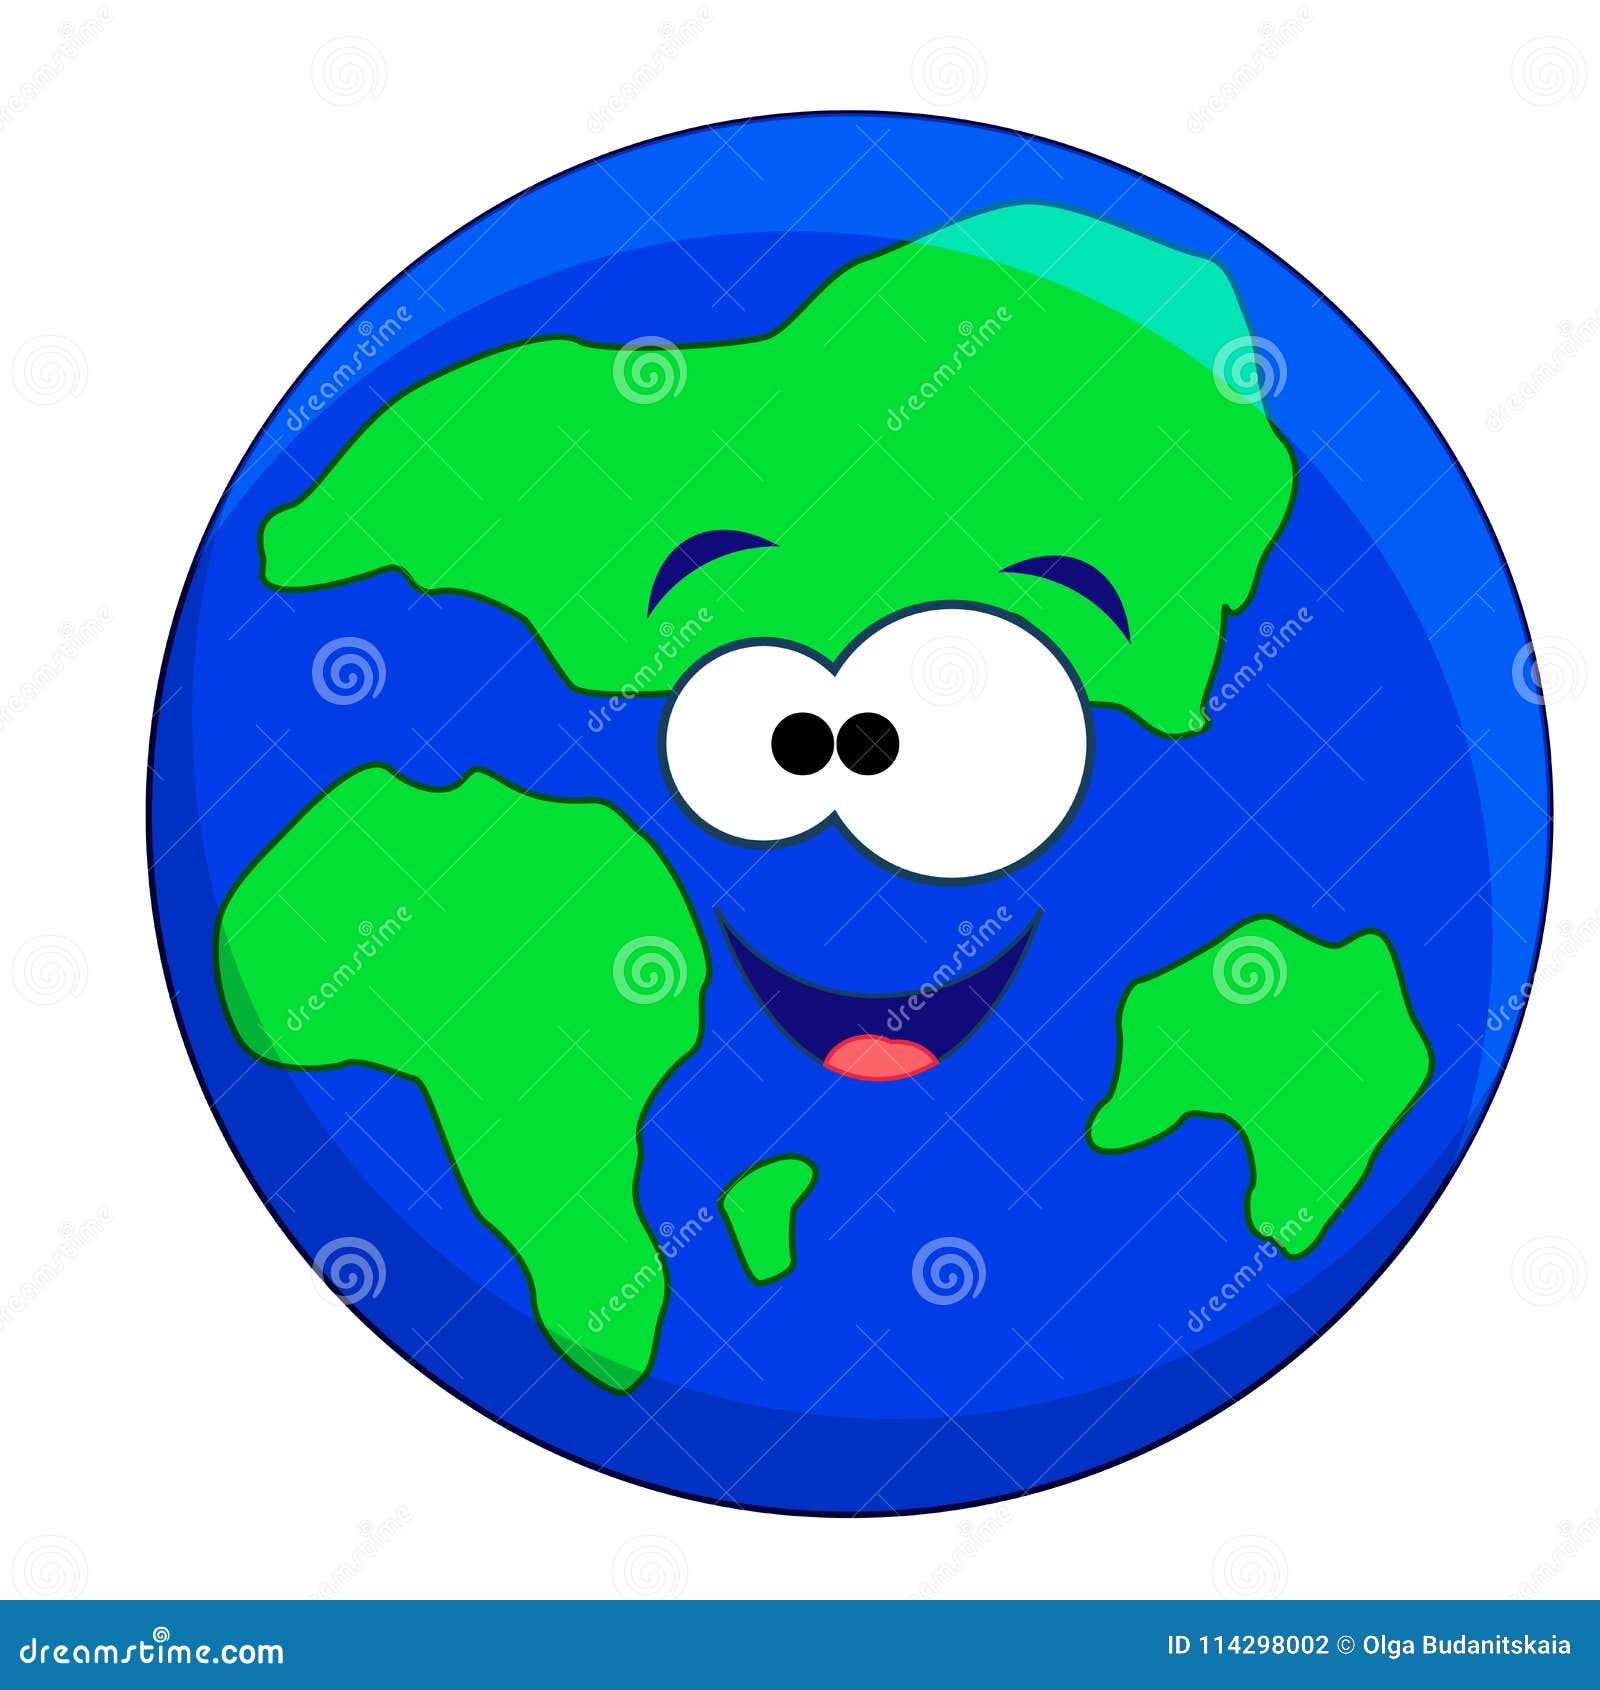 Funny Cartoon Earth. Vector Illustration Isolated on White Background.  Smiling Earth Stock Vector - Illustration of concept, peace: 114298002